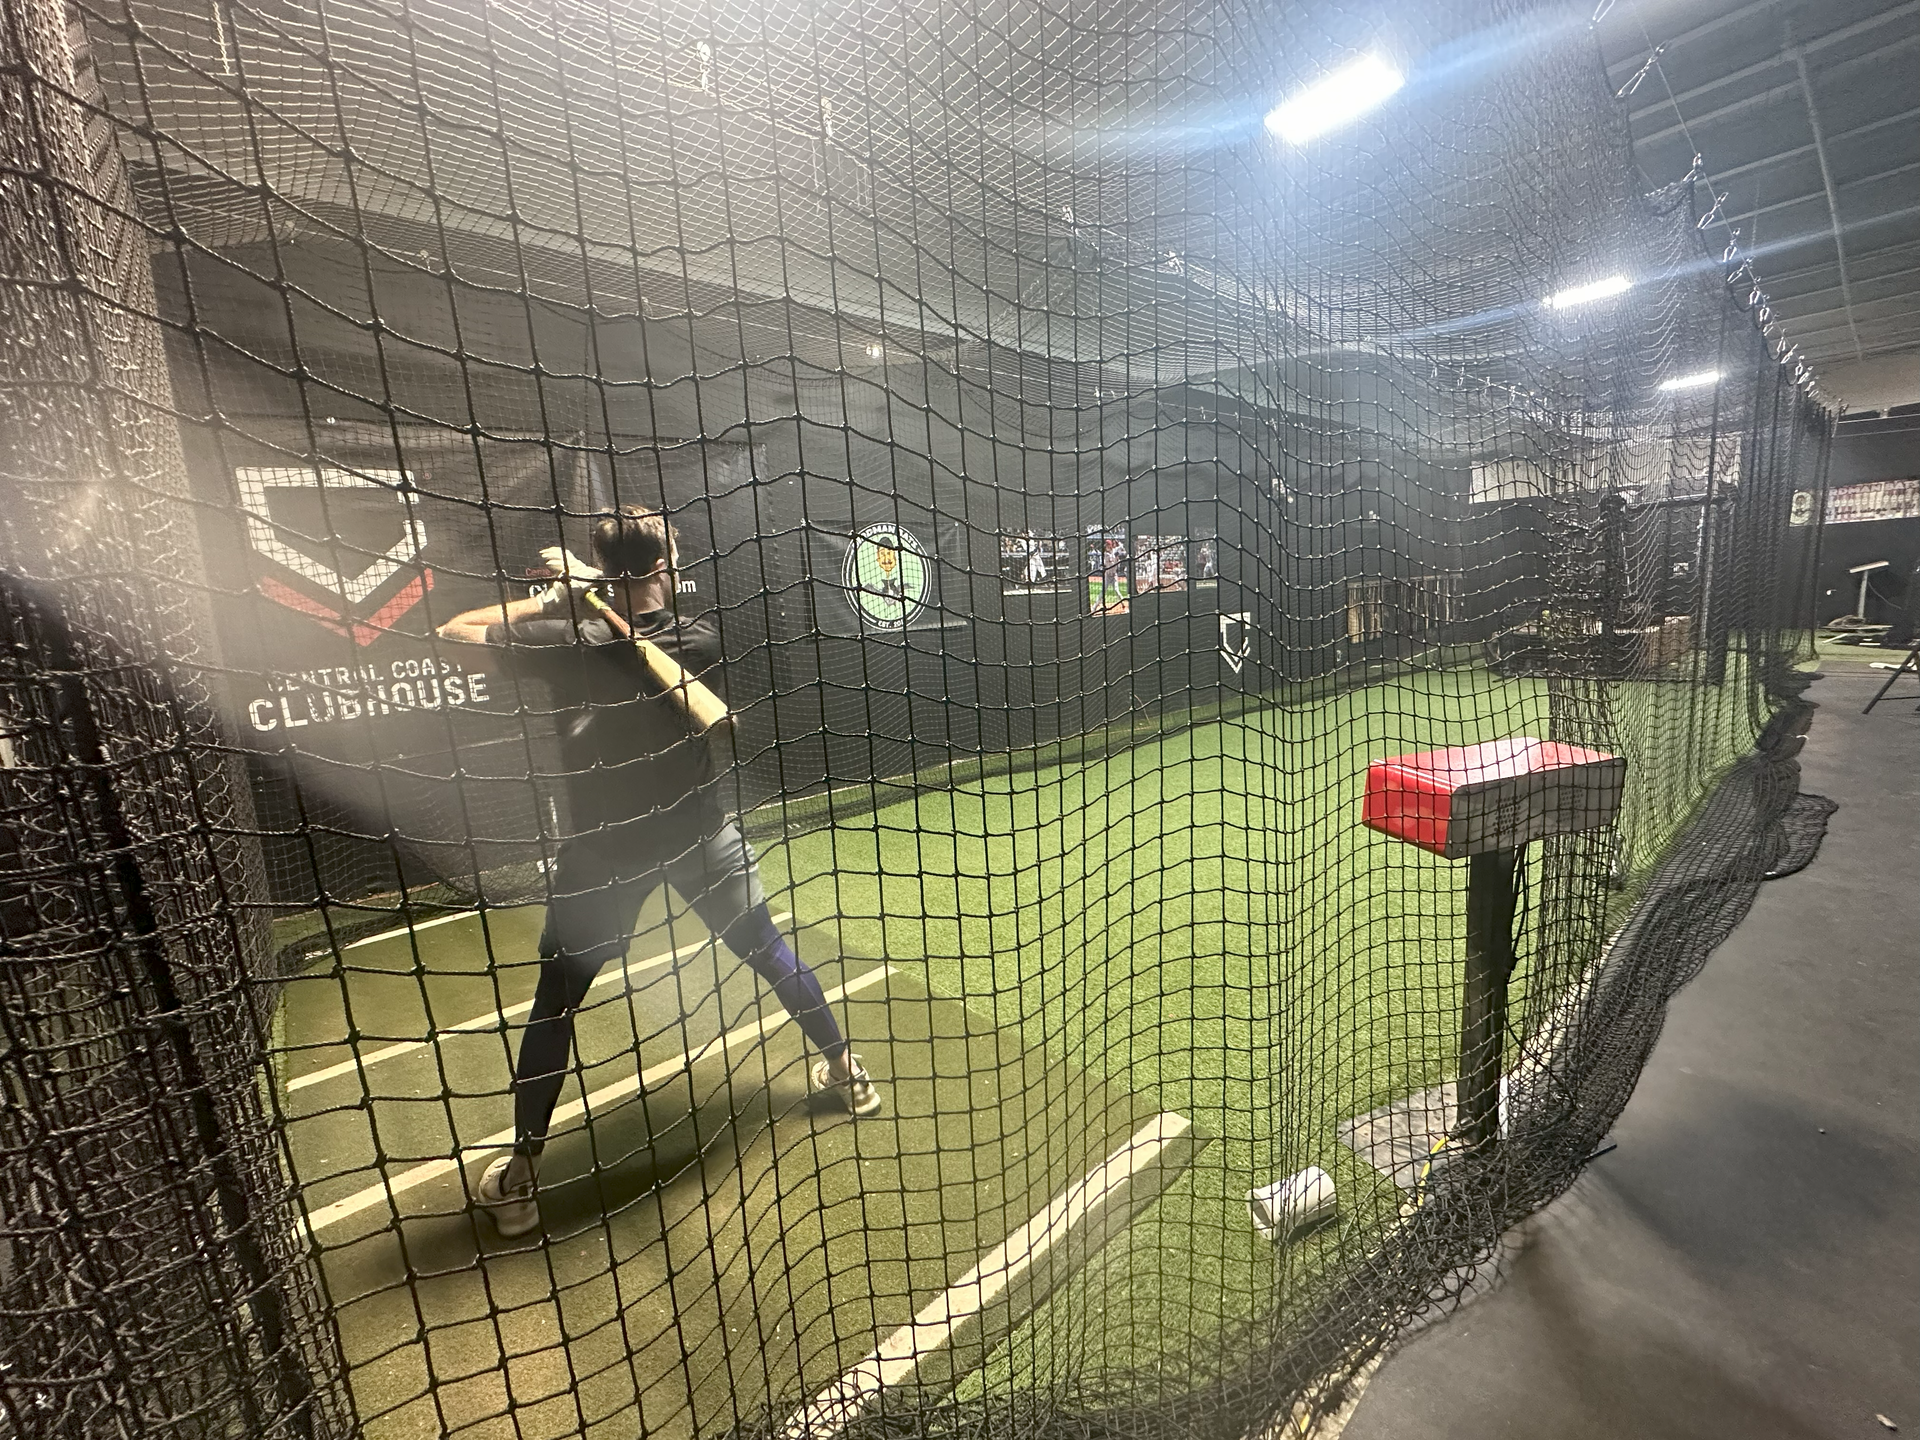 A person is swinging a bat at a baseball in a batting cage.